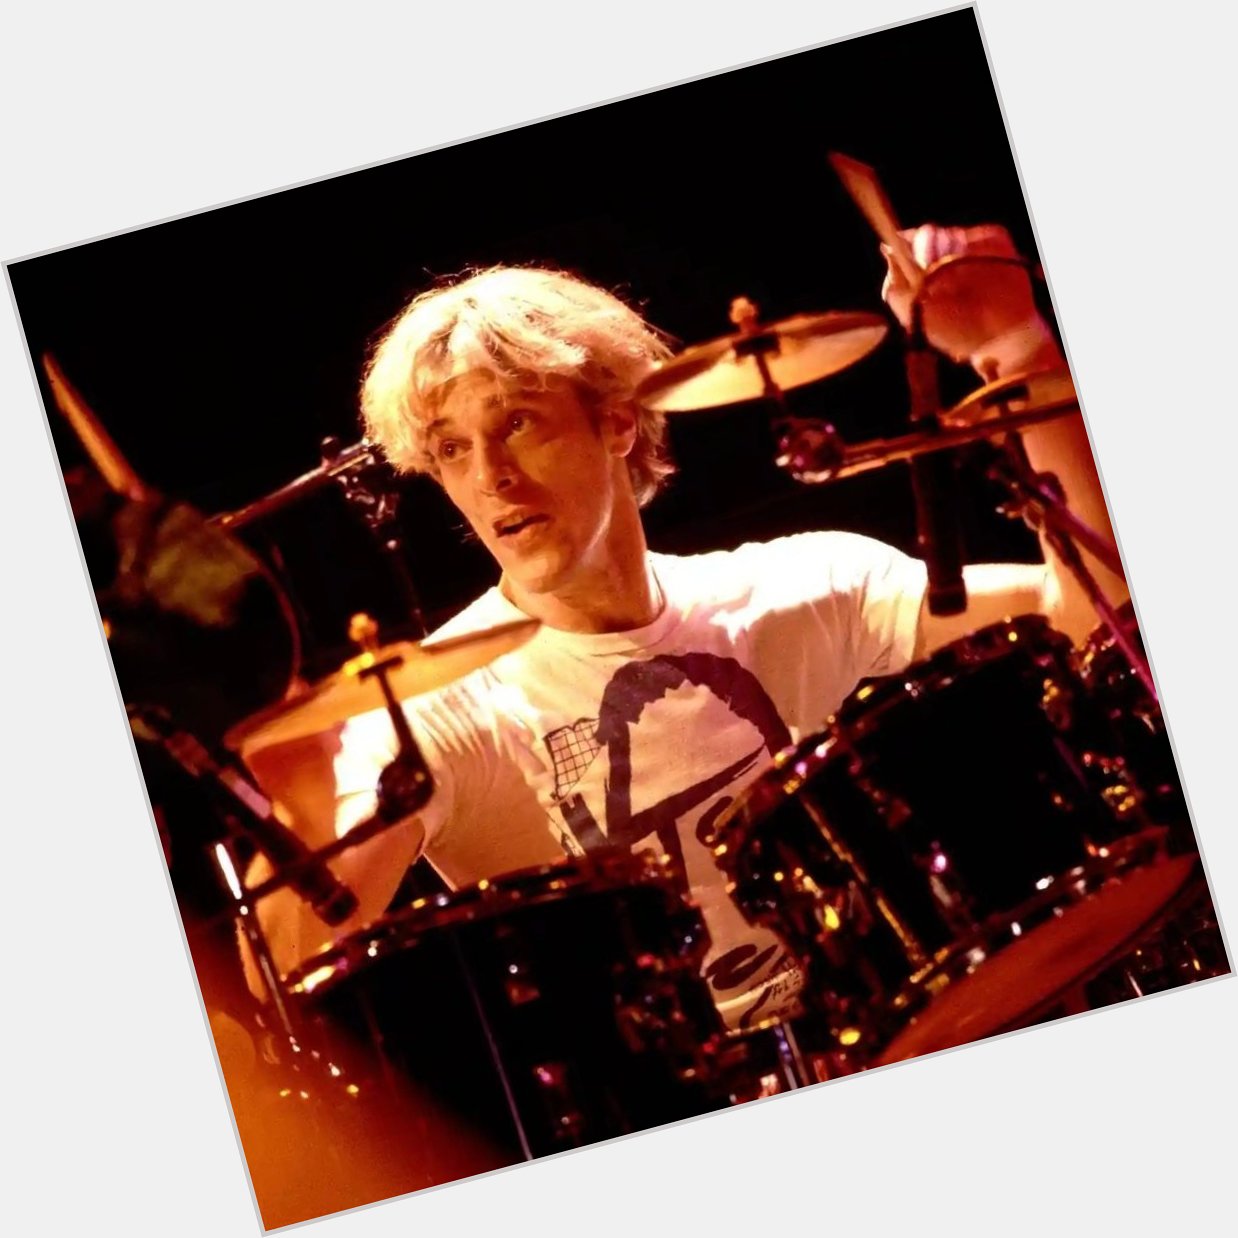 Happy 70th birthday mr stewart copeland xxx I love you more than words could ever express 